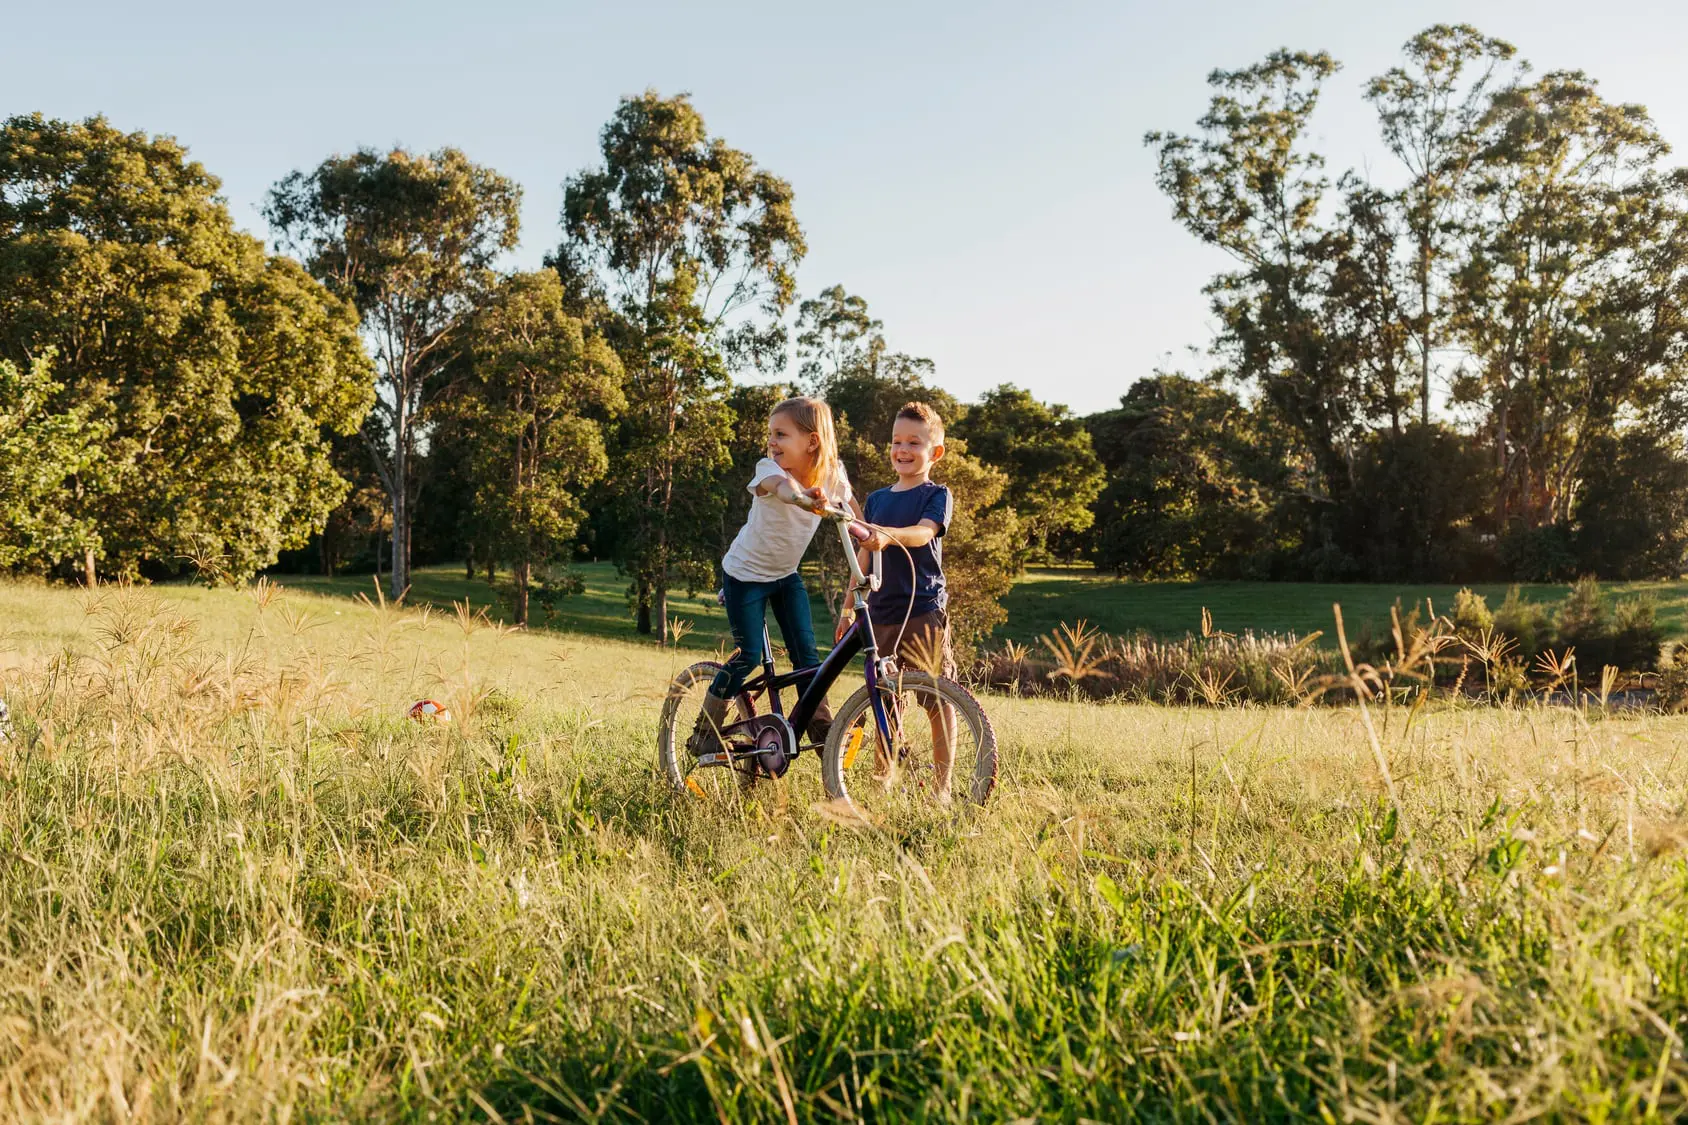 Two young children riding bike in park